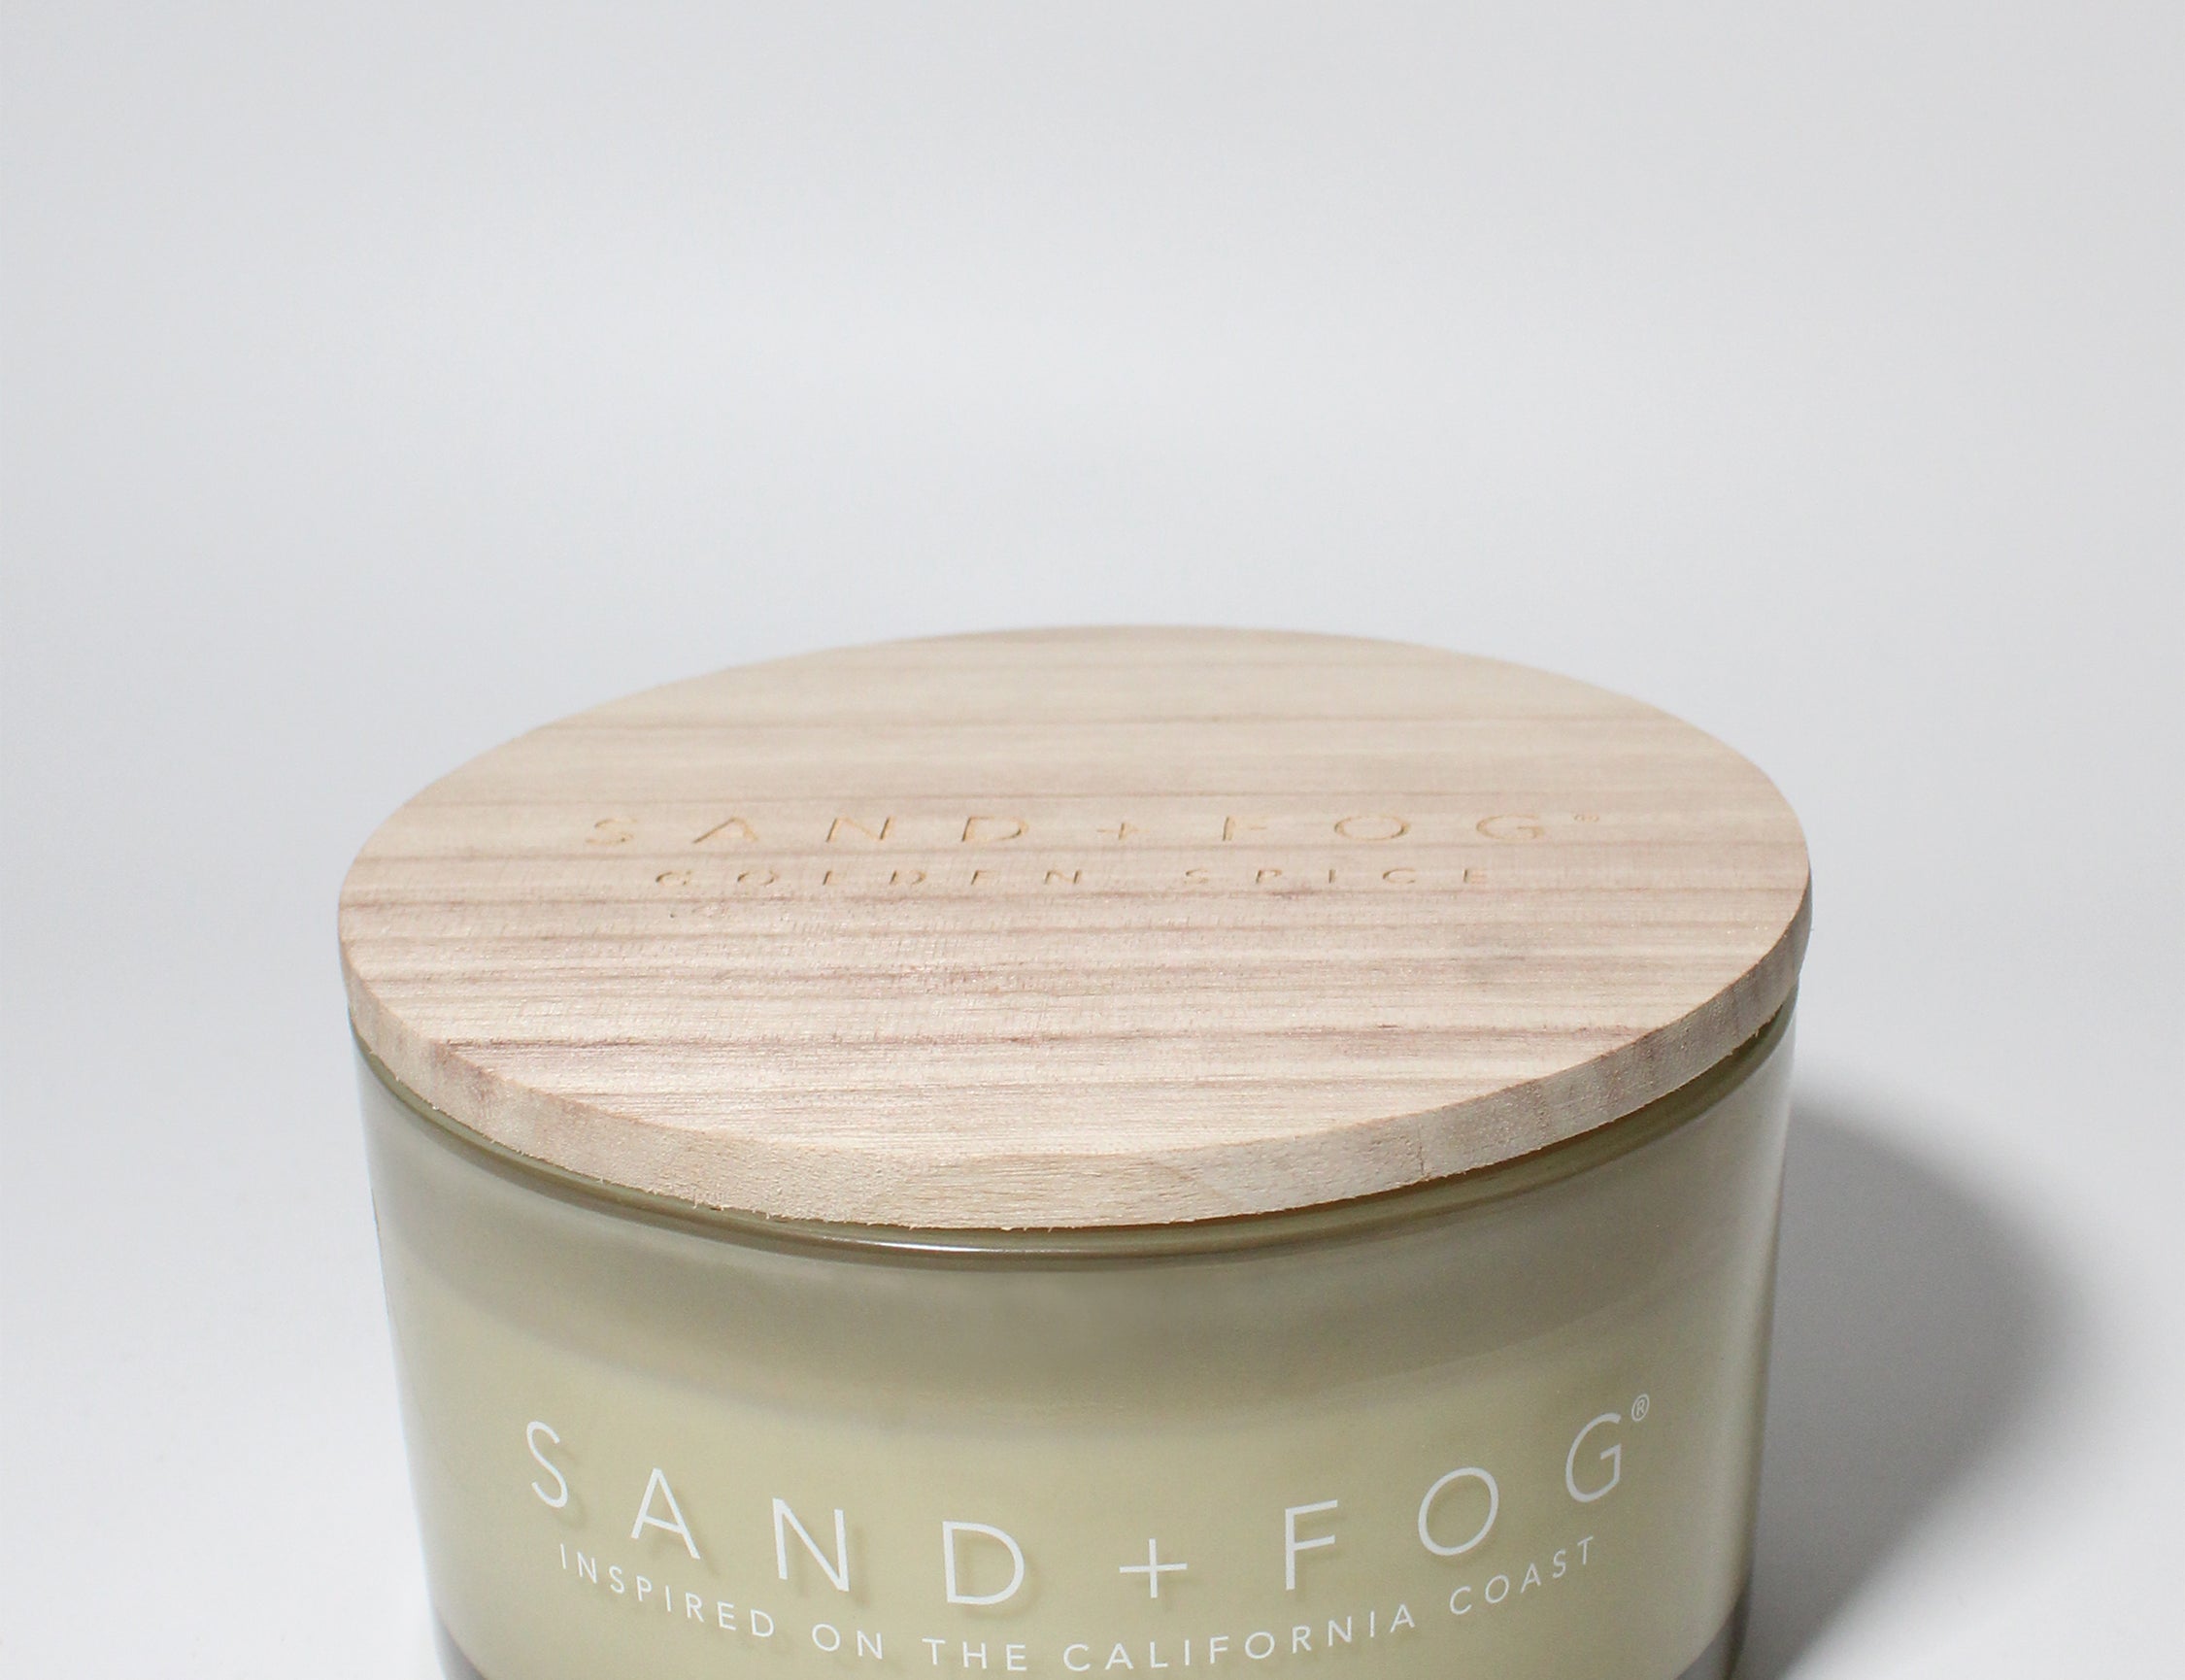 Golden Spice 23 oz scented Candle Flax vessel with Sand+Fog wood lid